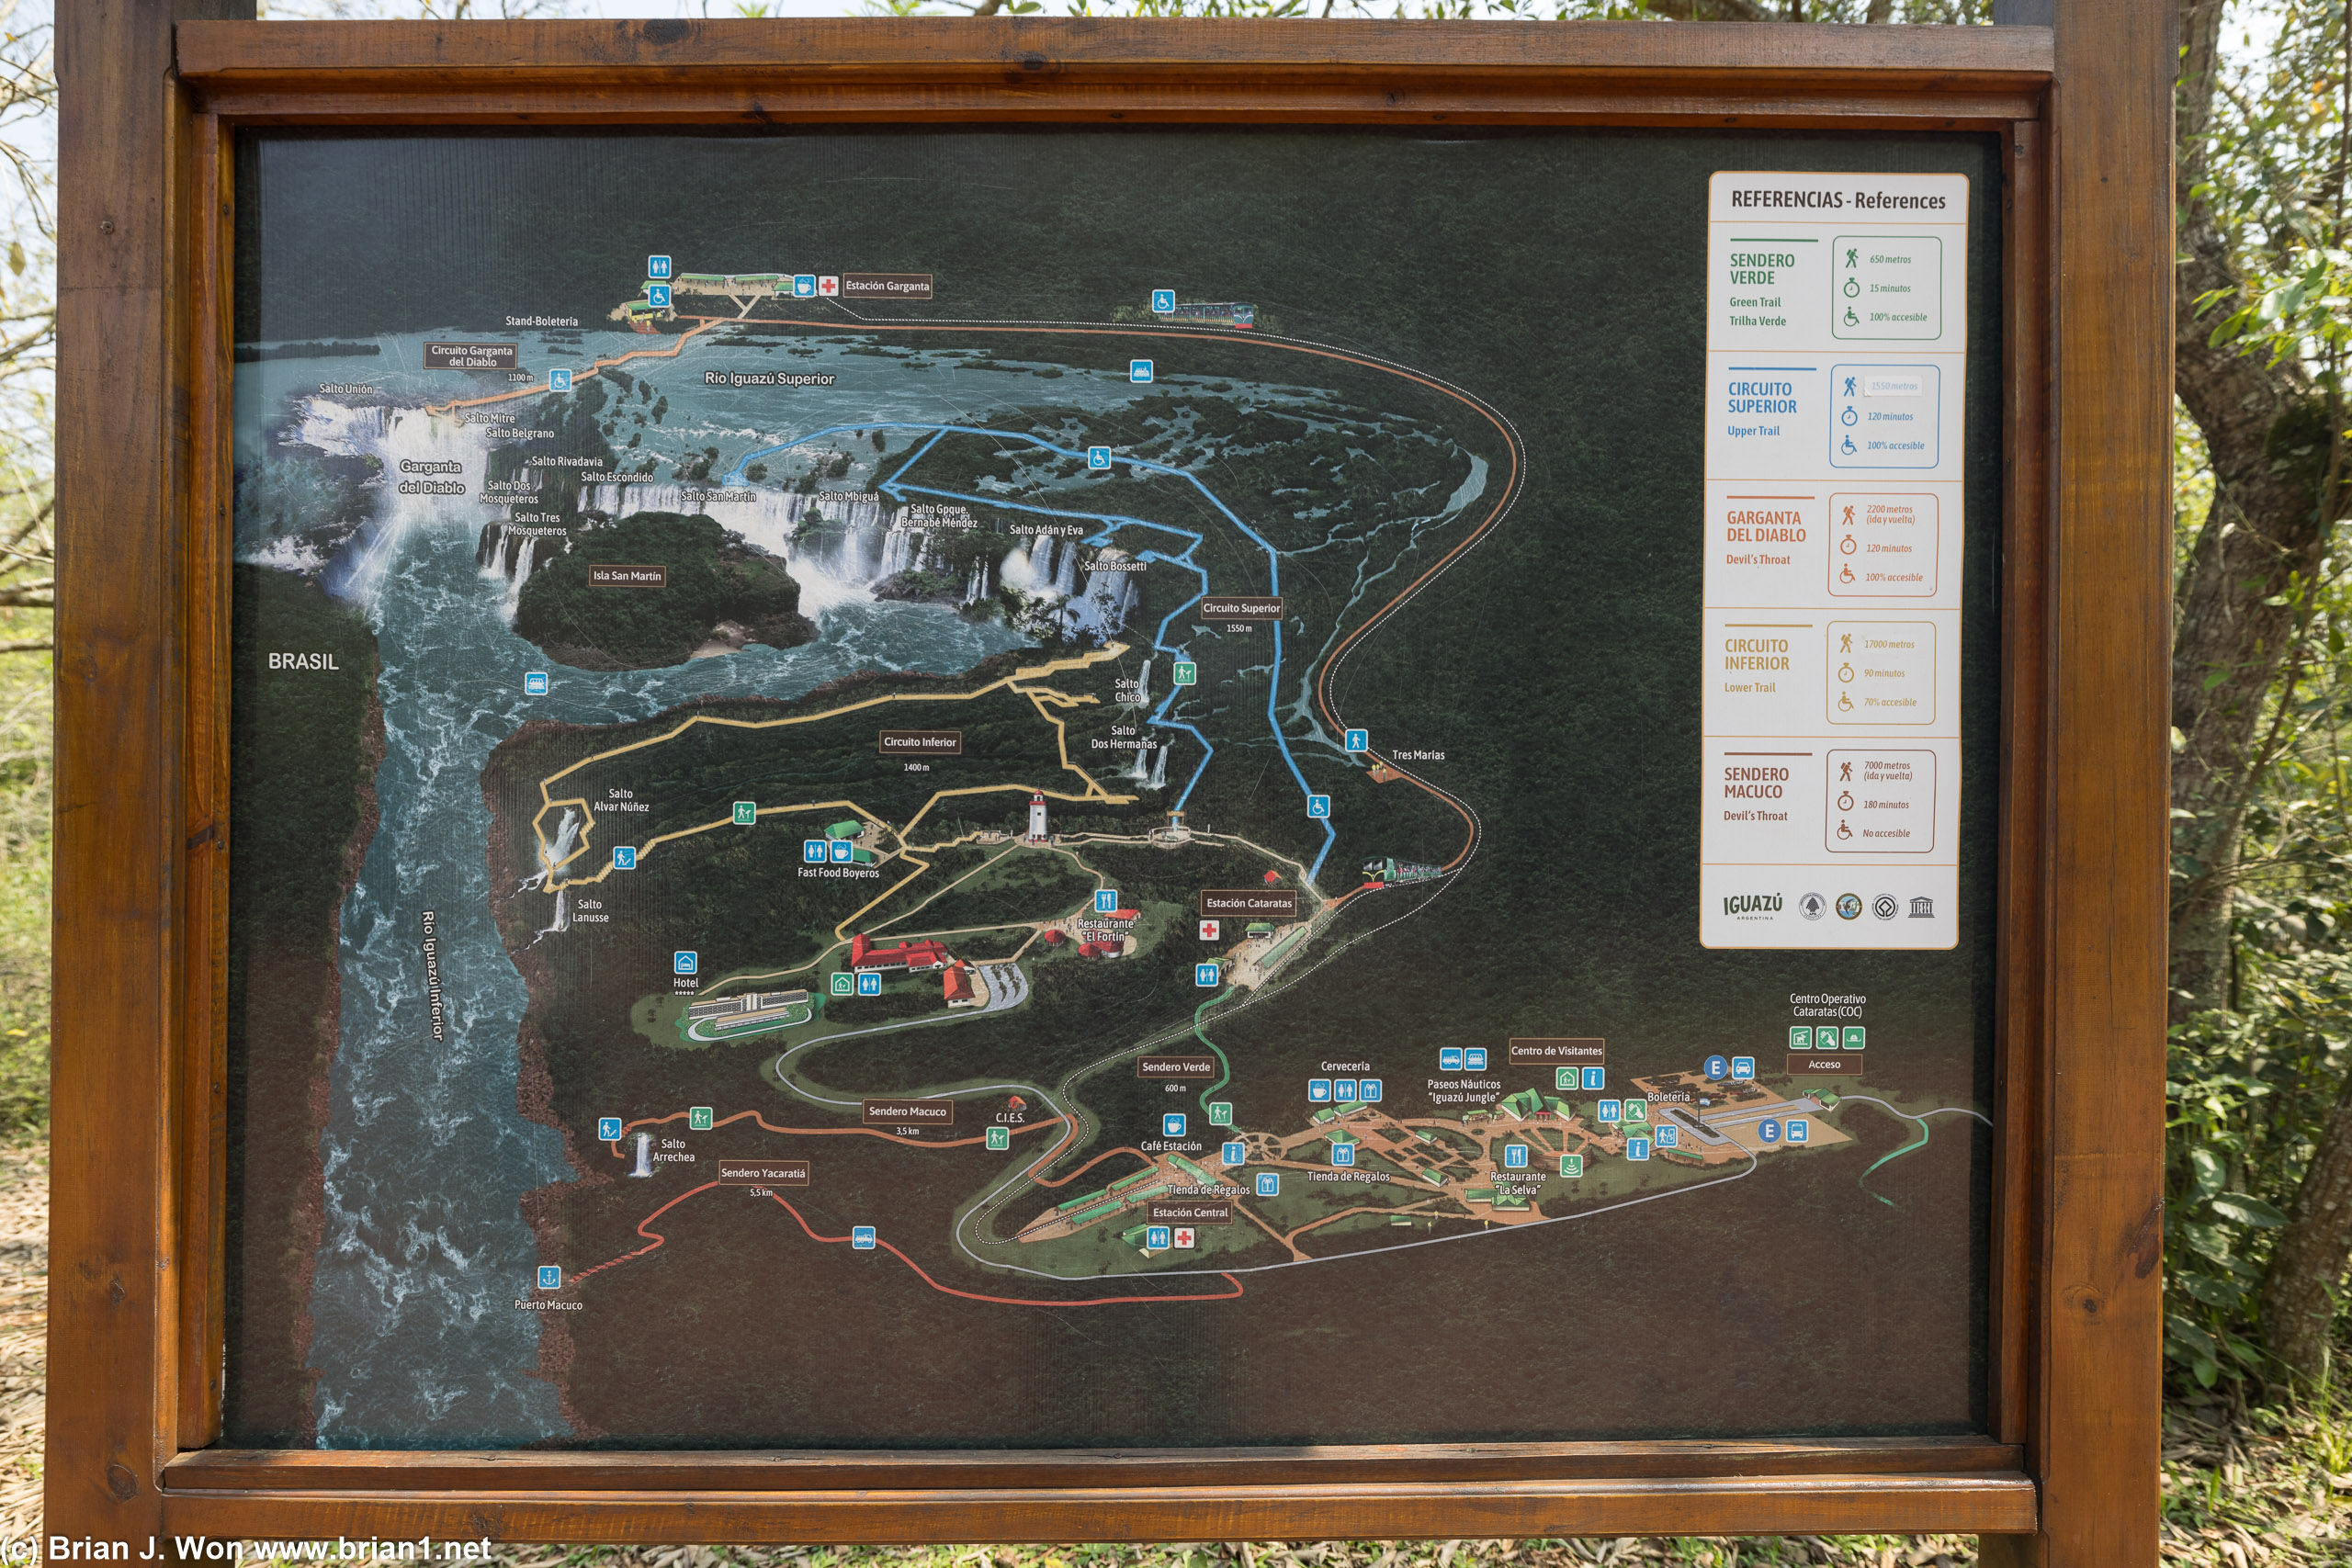 Park map including hiking/walking routes.